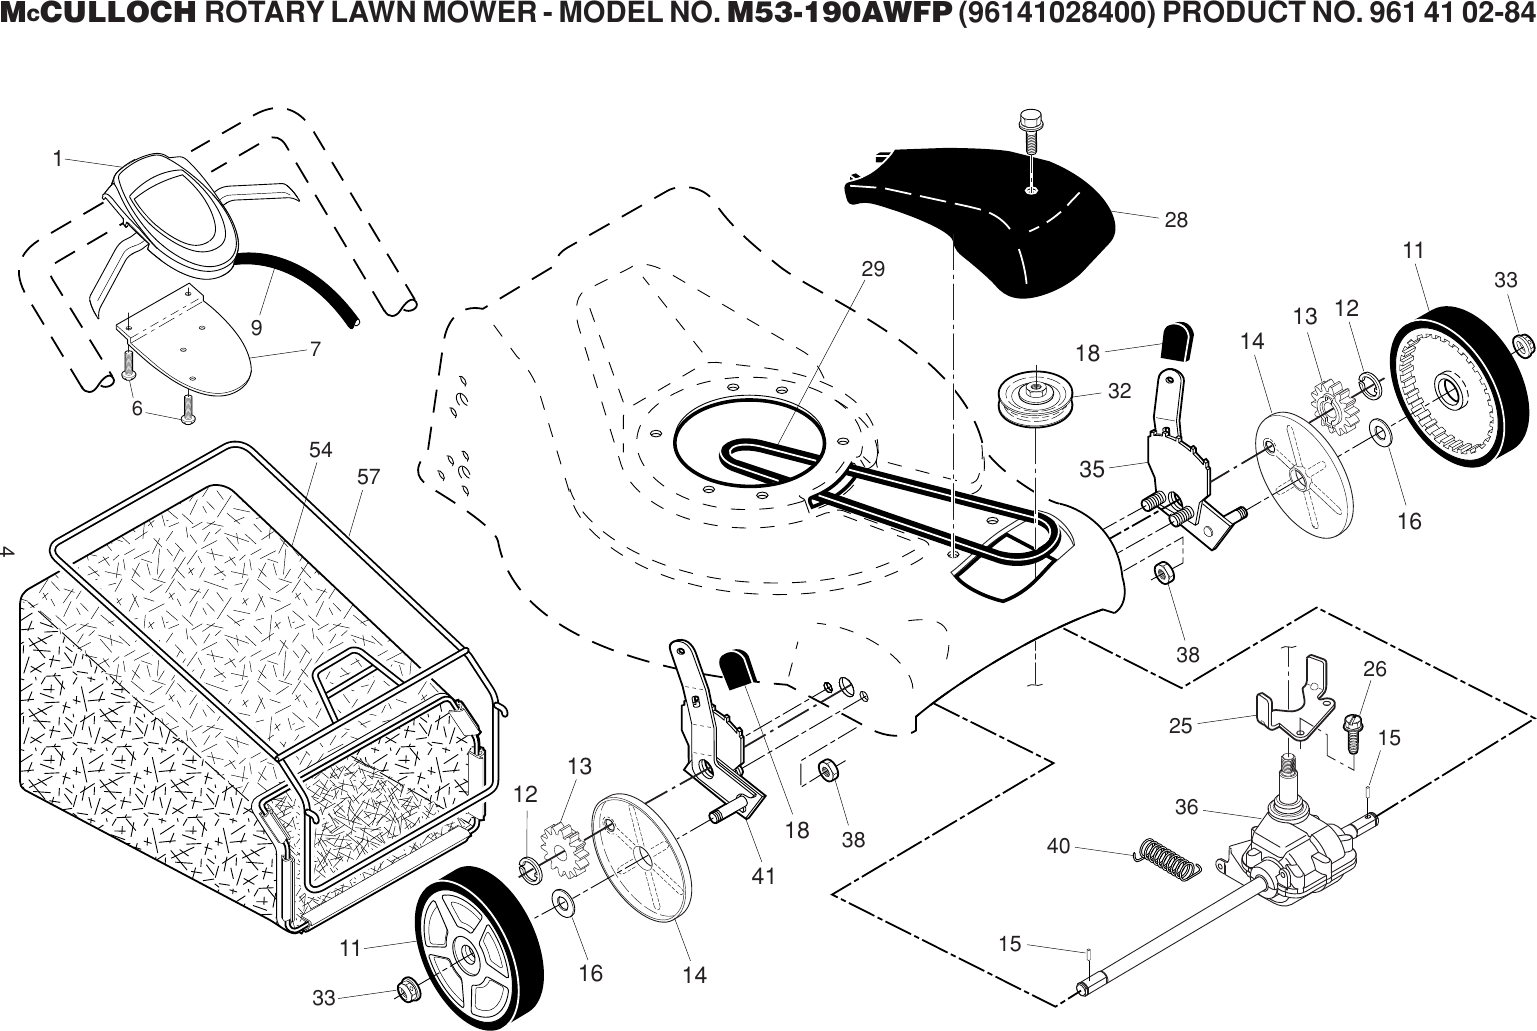 Page 4 of 5 - McCulloch M53-190AWFP IPL, McCulloch, M53-190AWFP, 96141028400, 2013-11, Lawn Mower User Manual  To The 5052dc1f-8f17-4e4a-baa0-c66d6f1bee87